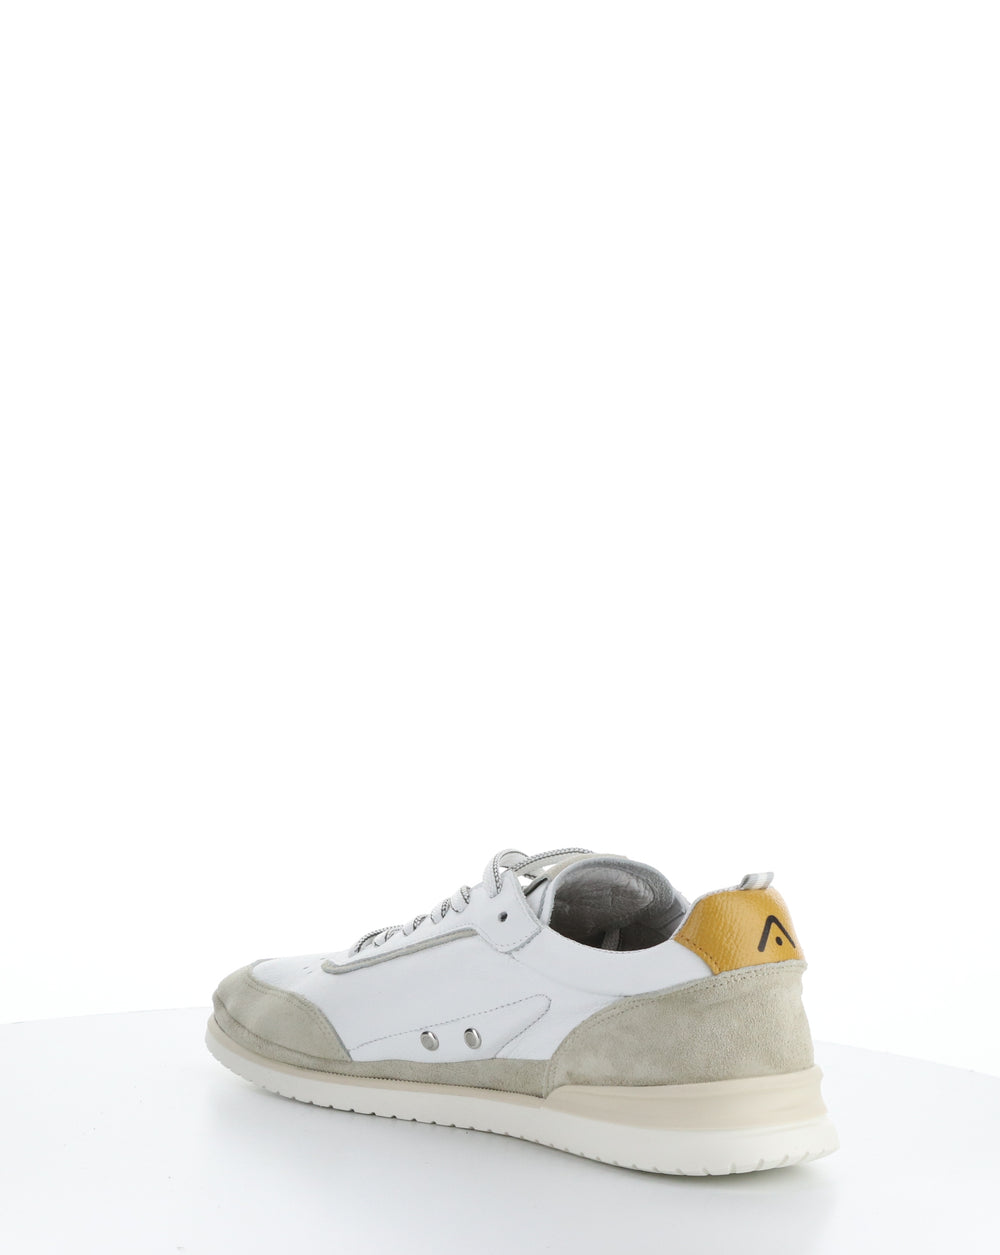 11939 BEIGE/OFFWHT/GREY Lace-up Shoes